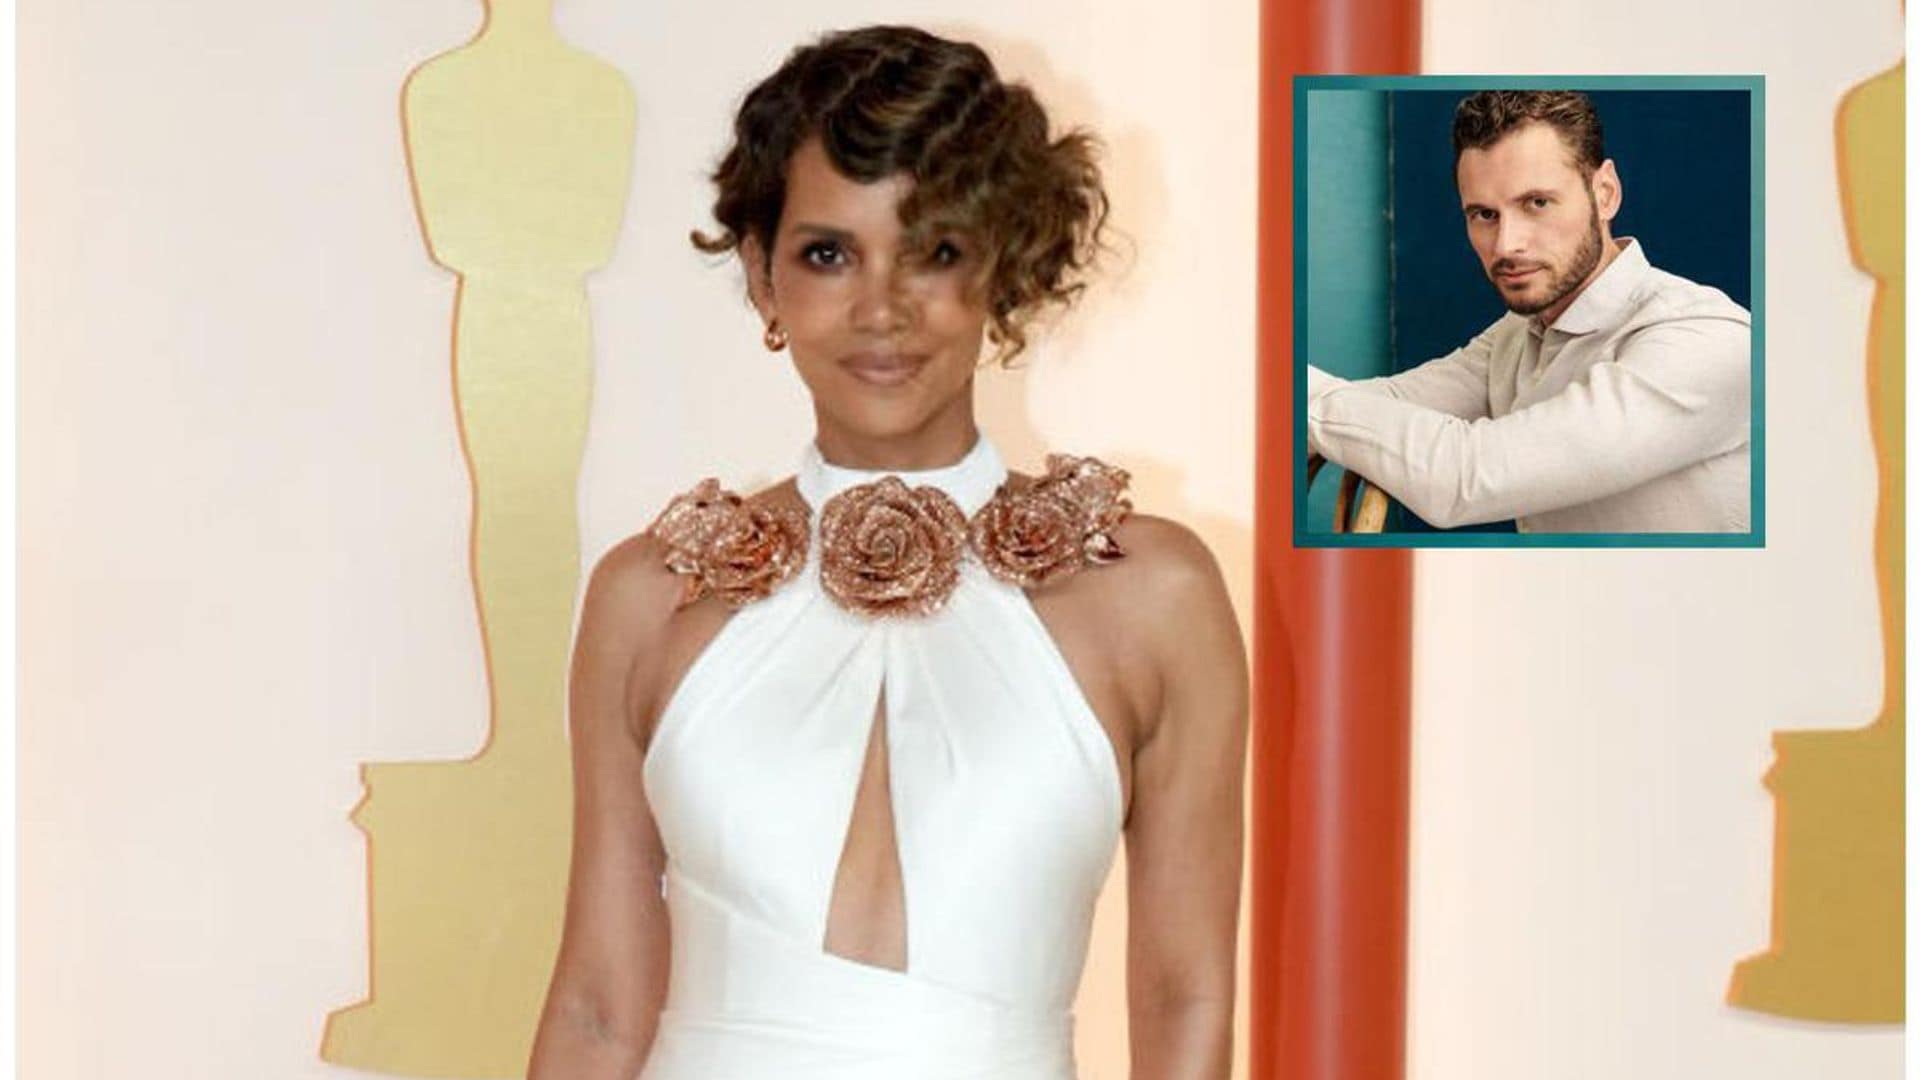 Halle Berry mourns the death of her ‘X-Men’ co-star Adan Canto